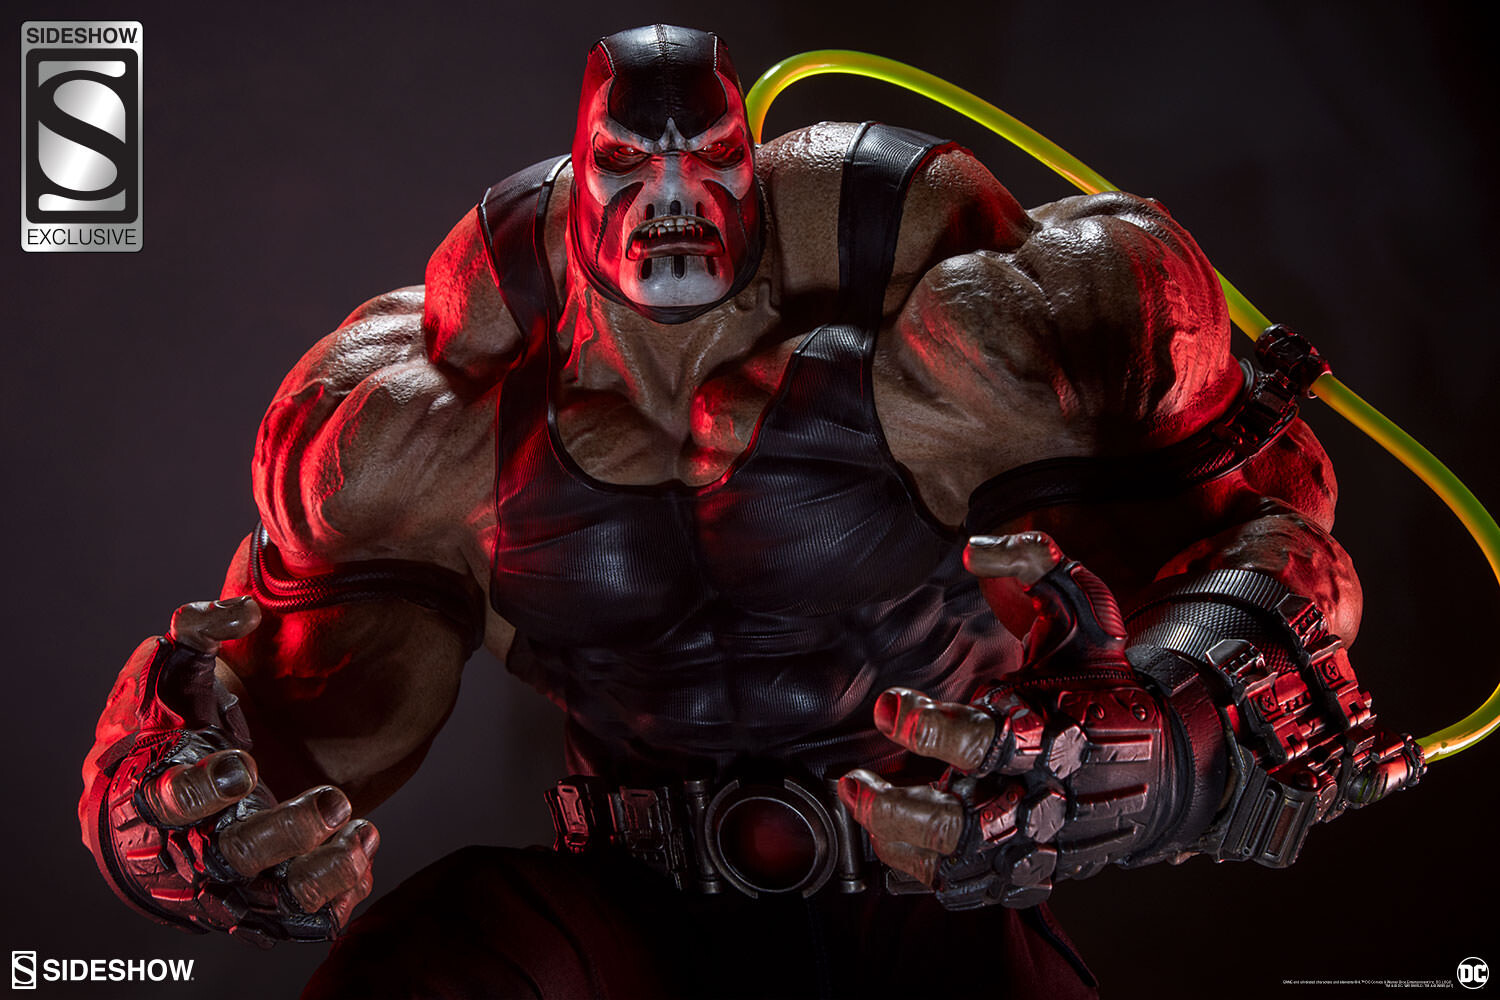 ArtStation - Bane Premium Format™ Figure by Sideshow Collectibles